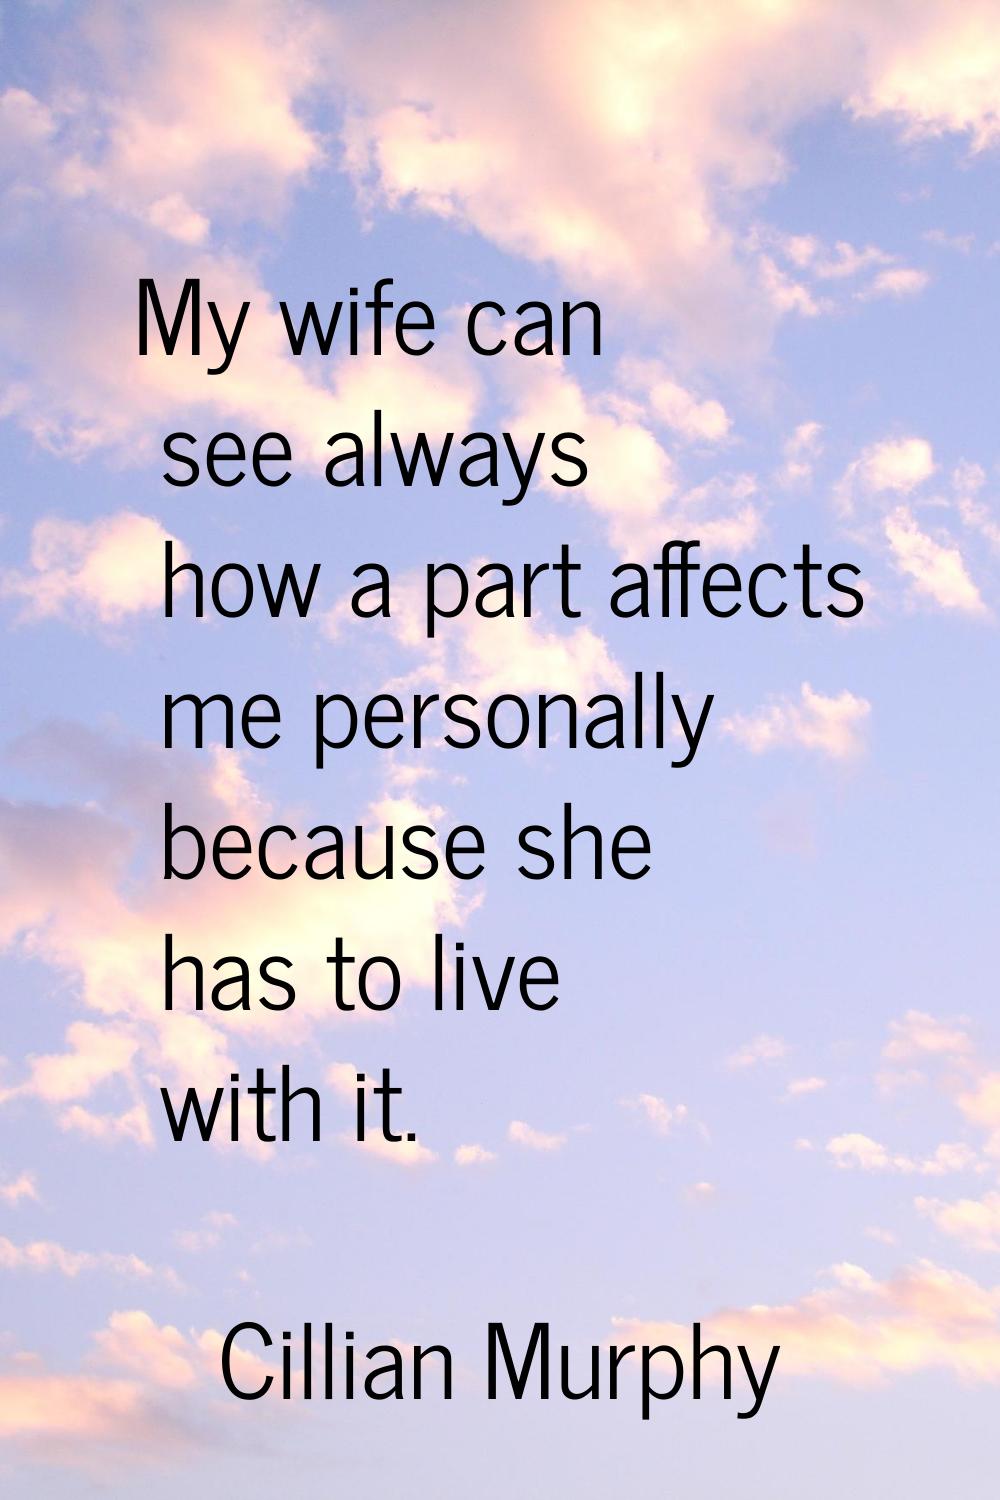 My wife can see always how a part affects me personally because she has to live with it.